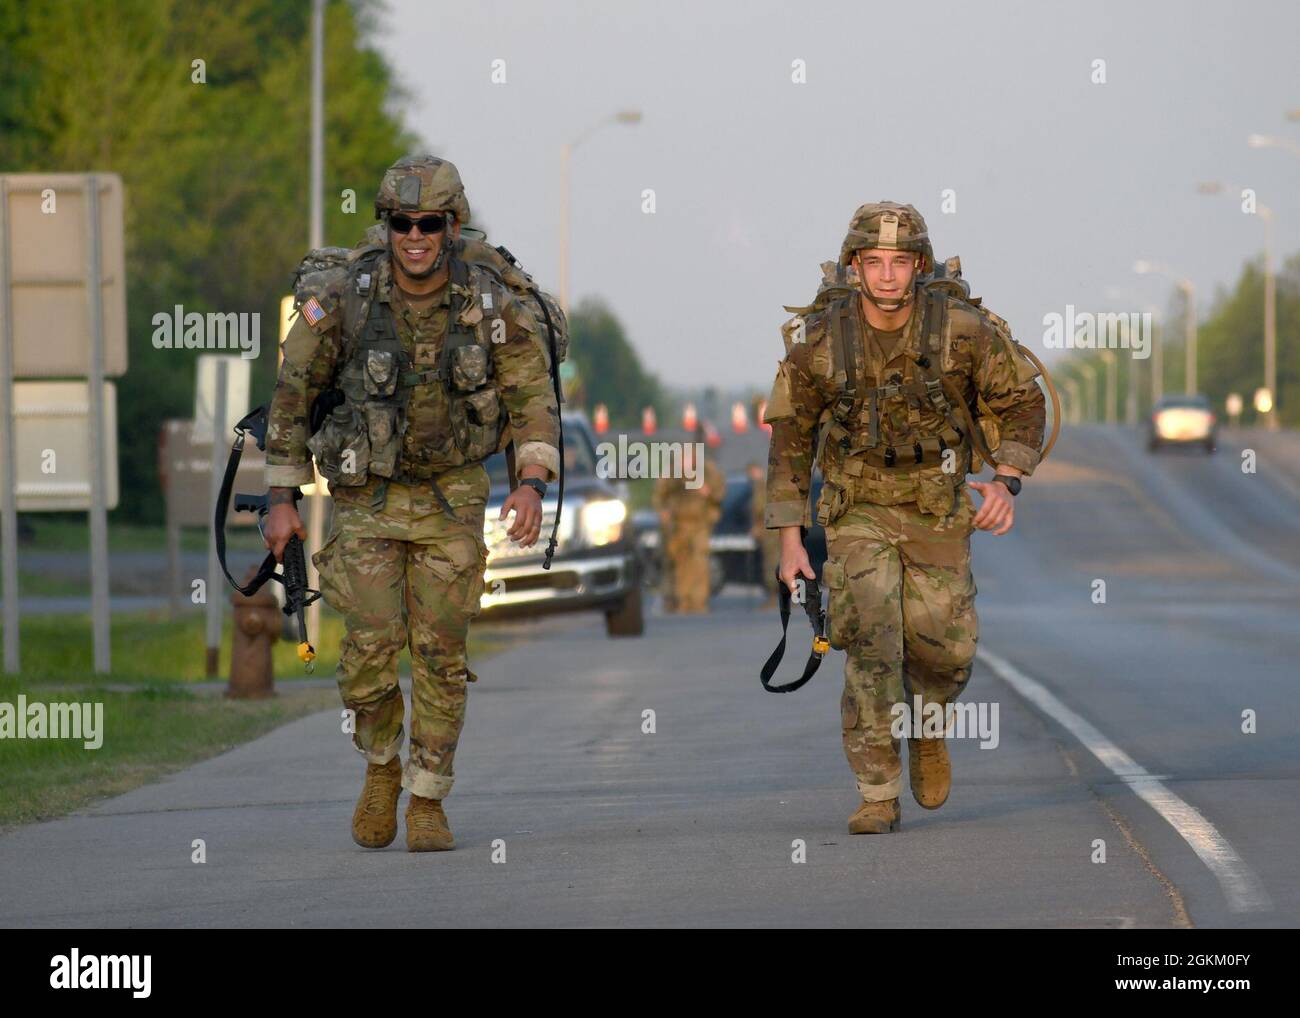 FORT DRUM, N.Y. – U.S. Army Sgt. Troy Perez, left, and Sgt. Joseph Ryan, both infantrymen with the New York National Guard’s 1st Battalion, 69th Infantry Regiment, conduct a 12-mile foot march as part of the 10th Mountain Division Expert Infantryman Badge assessment at Fort Drum, N.Y., May 21, 2021. Stock Photo